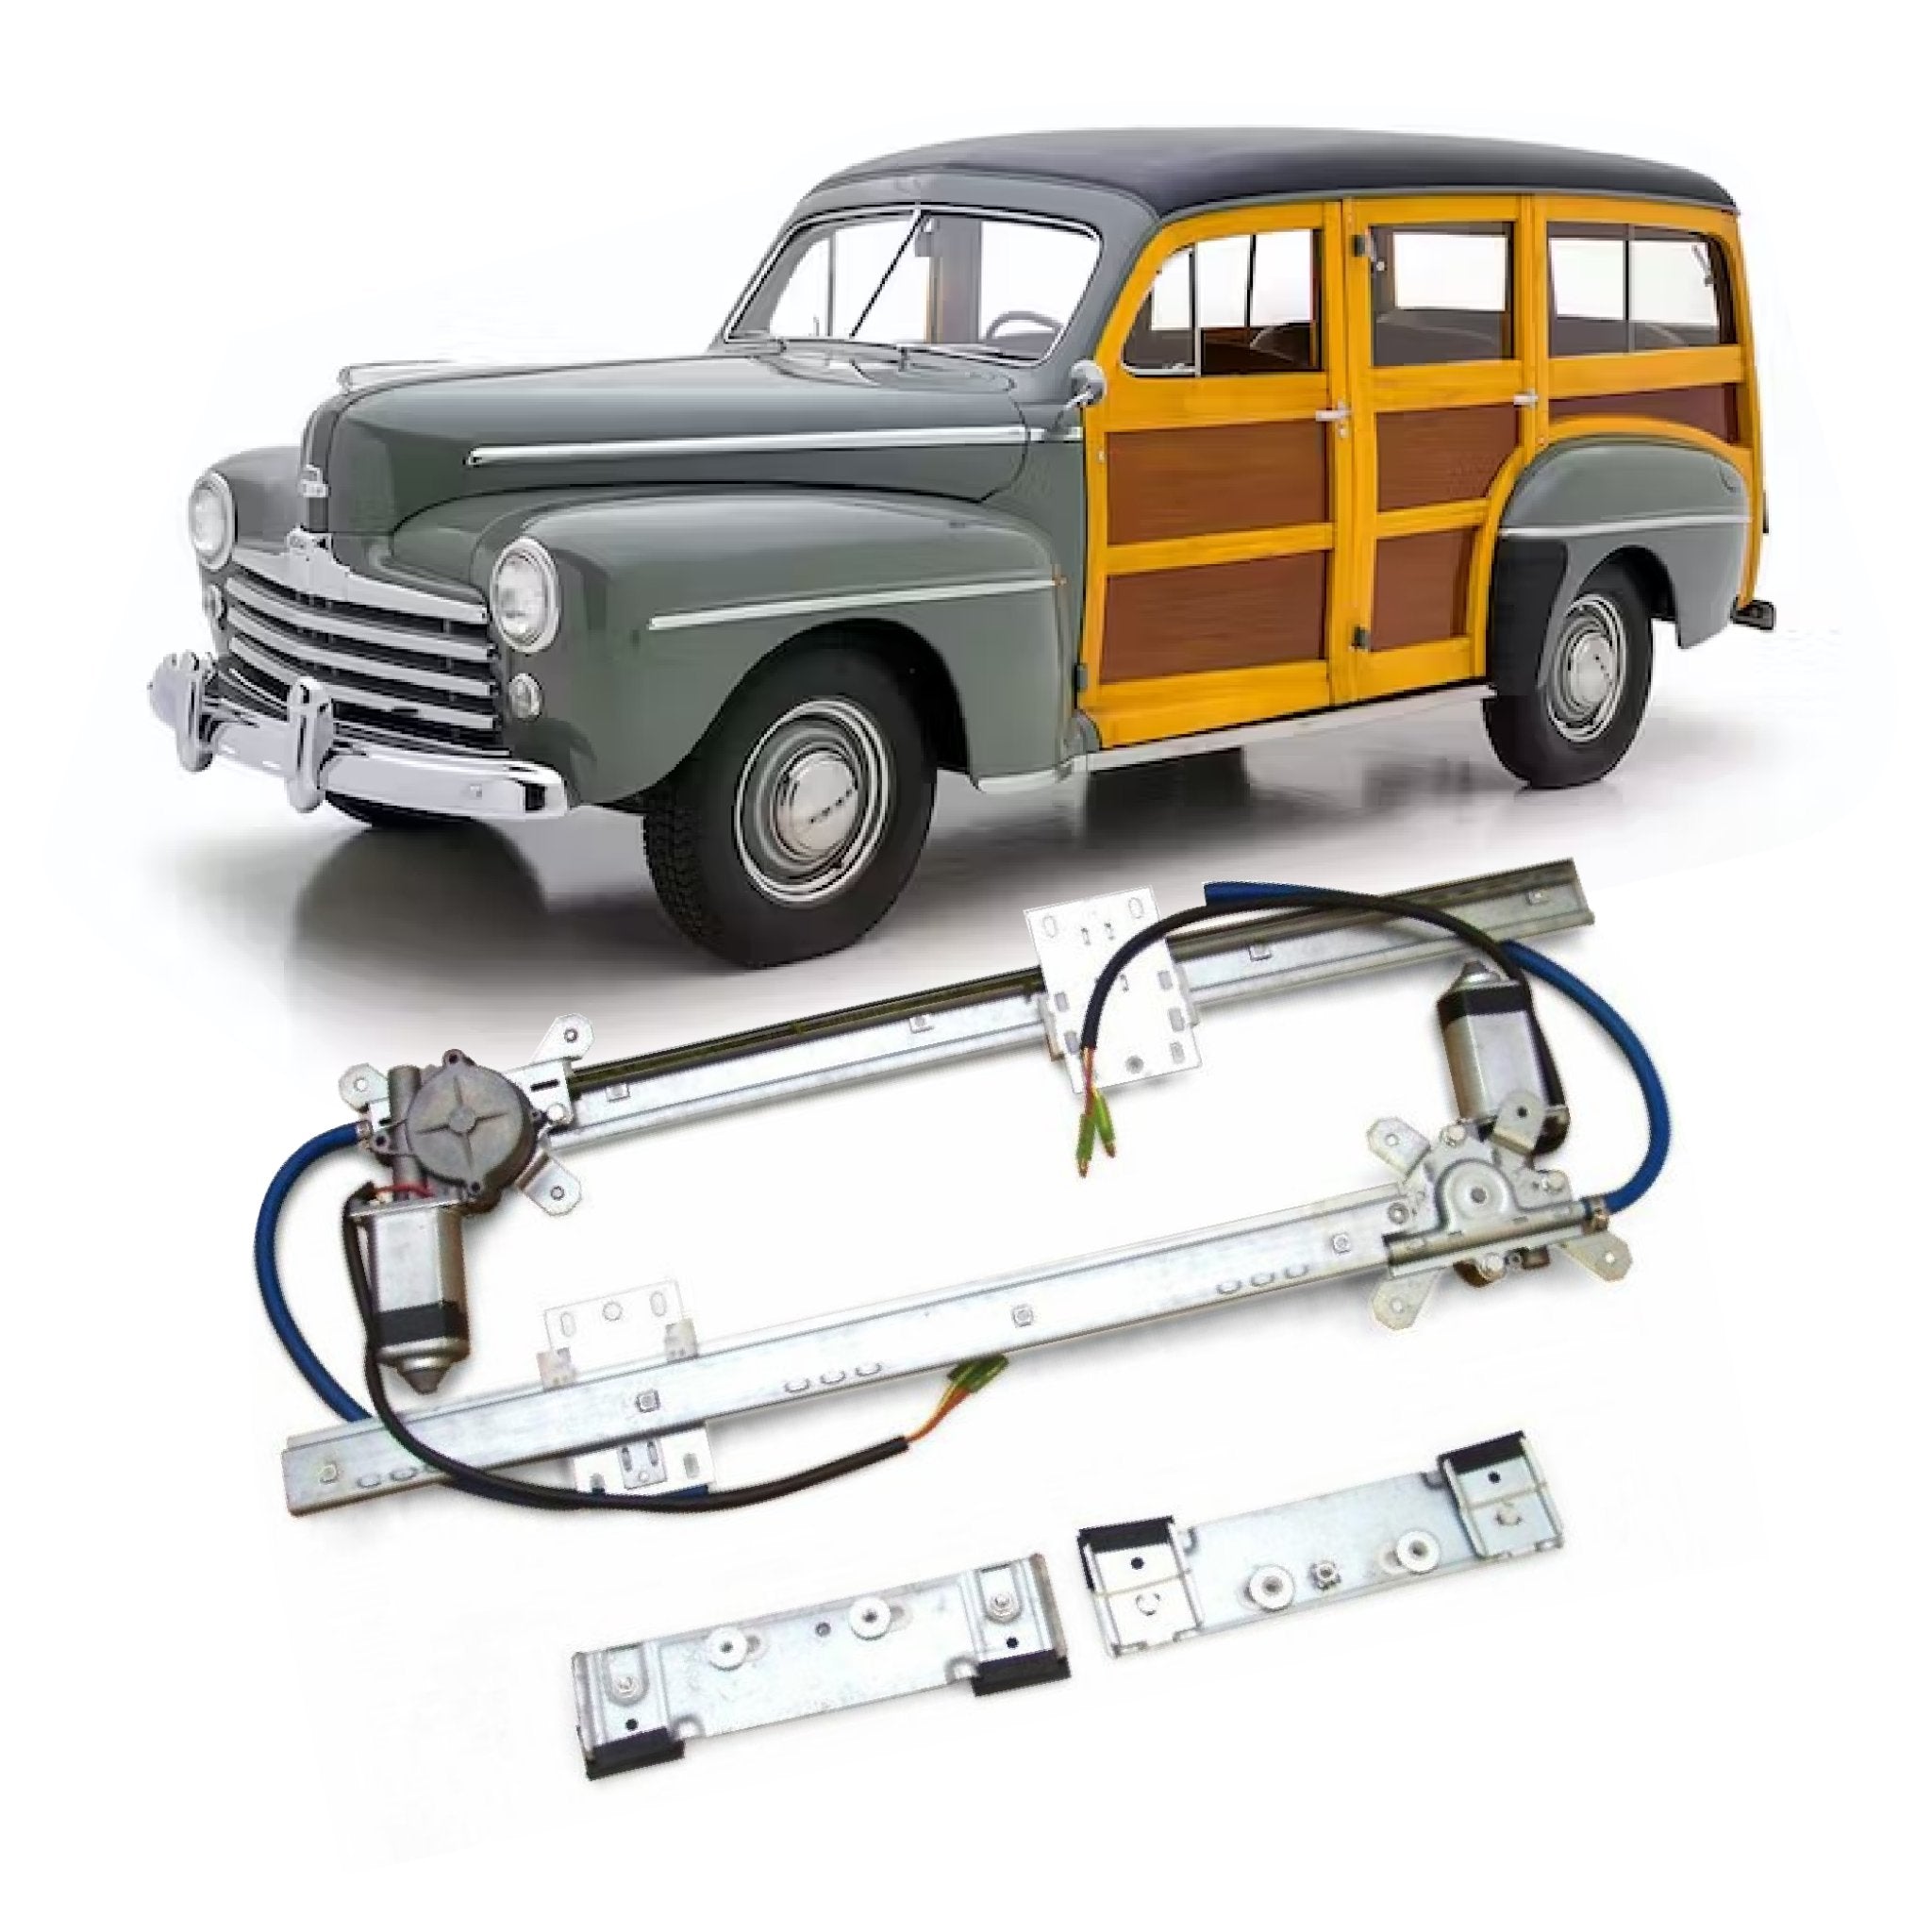 12V Power Window Kit for 1948 Ford Station Wagon Standard Deluxe Super Woody